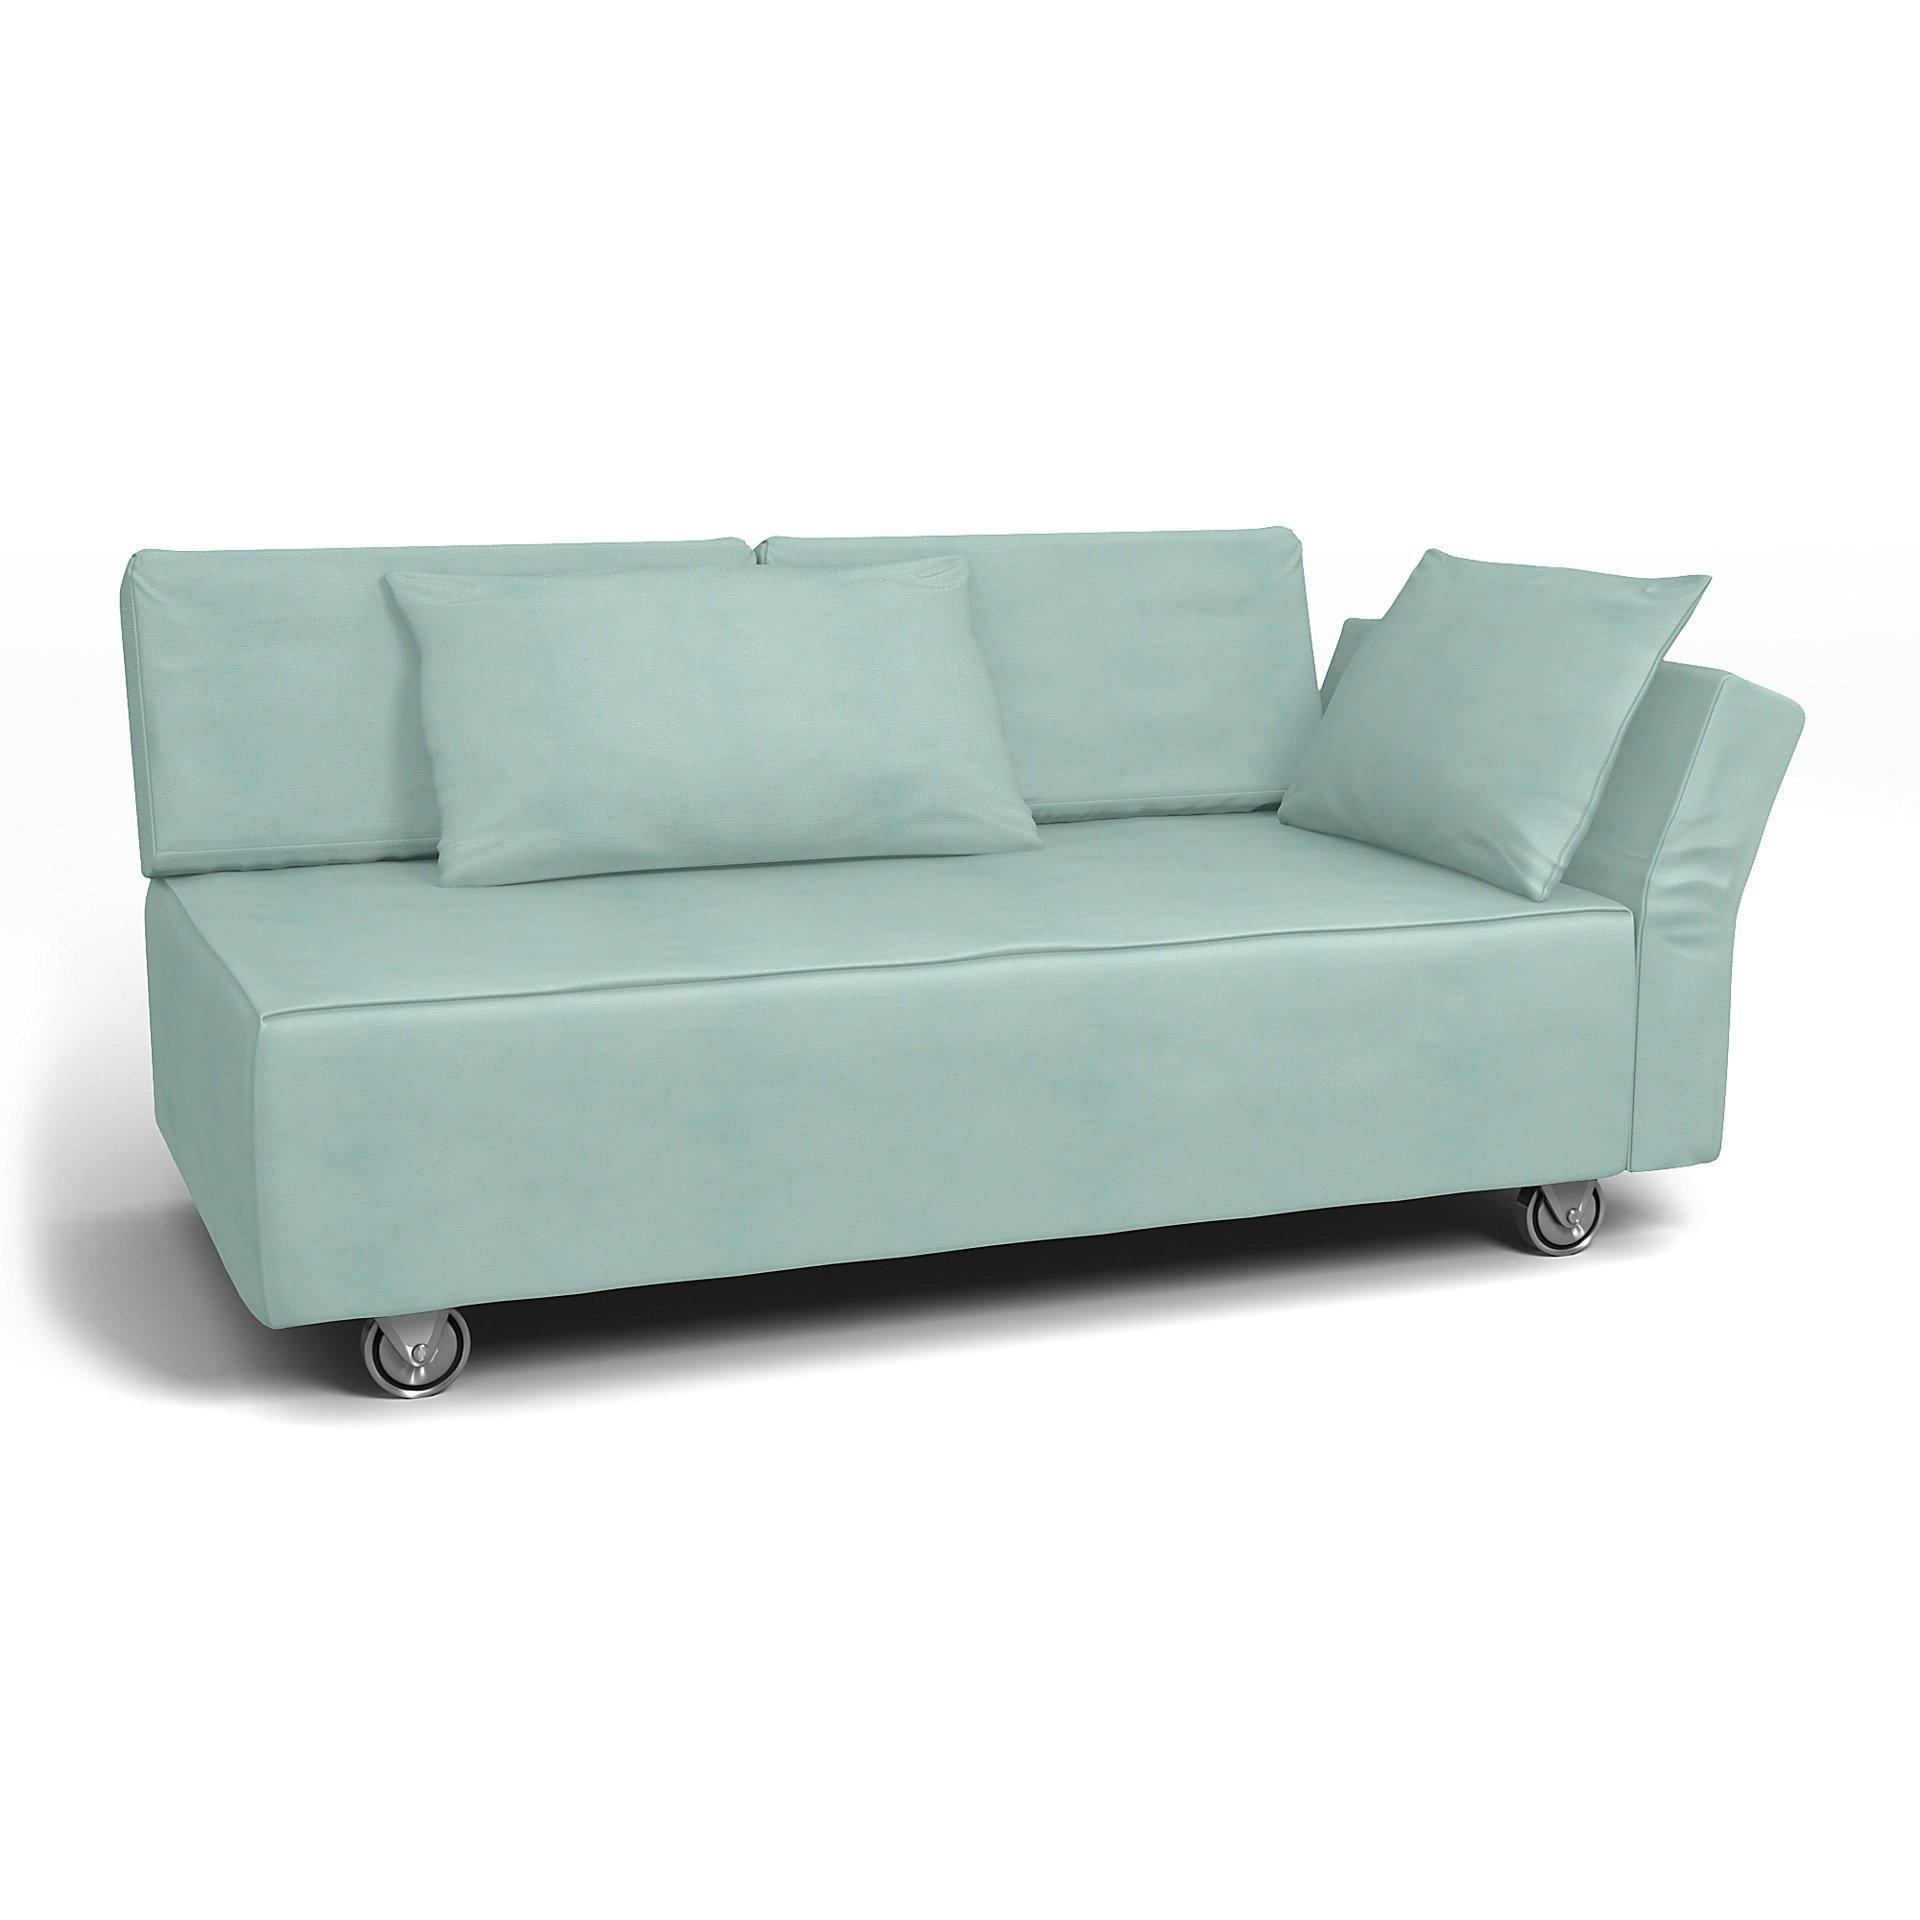 IKEA - Falsterbo 2 Seat Sofa with Right Arm Cover, Mineral Blue, Linen - Bemz